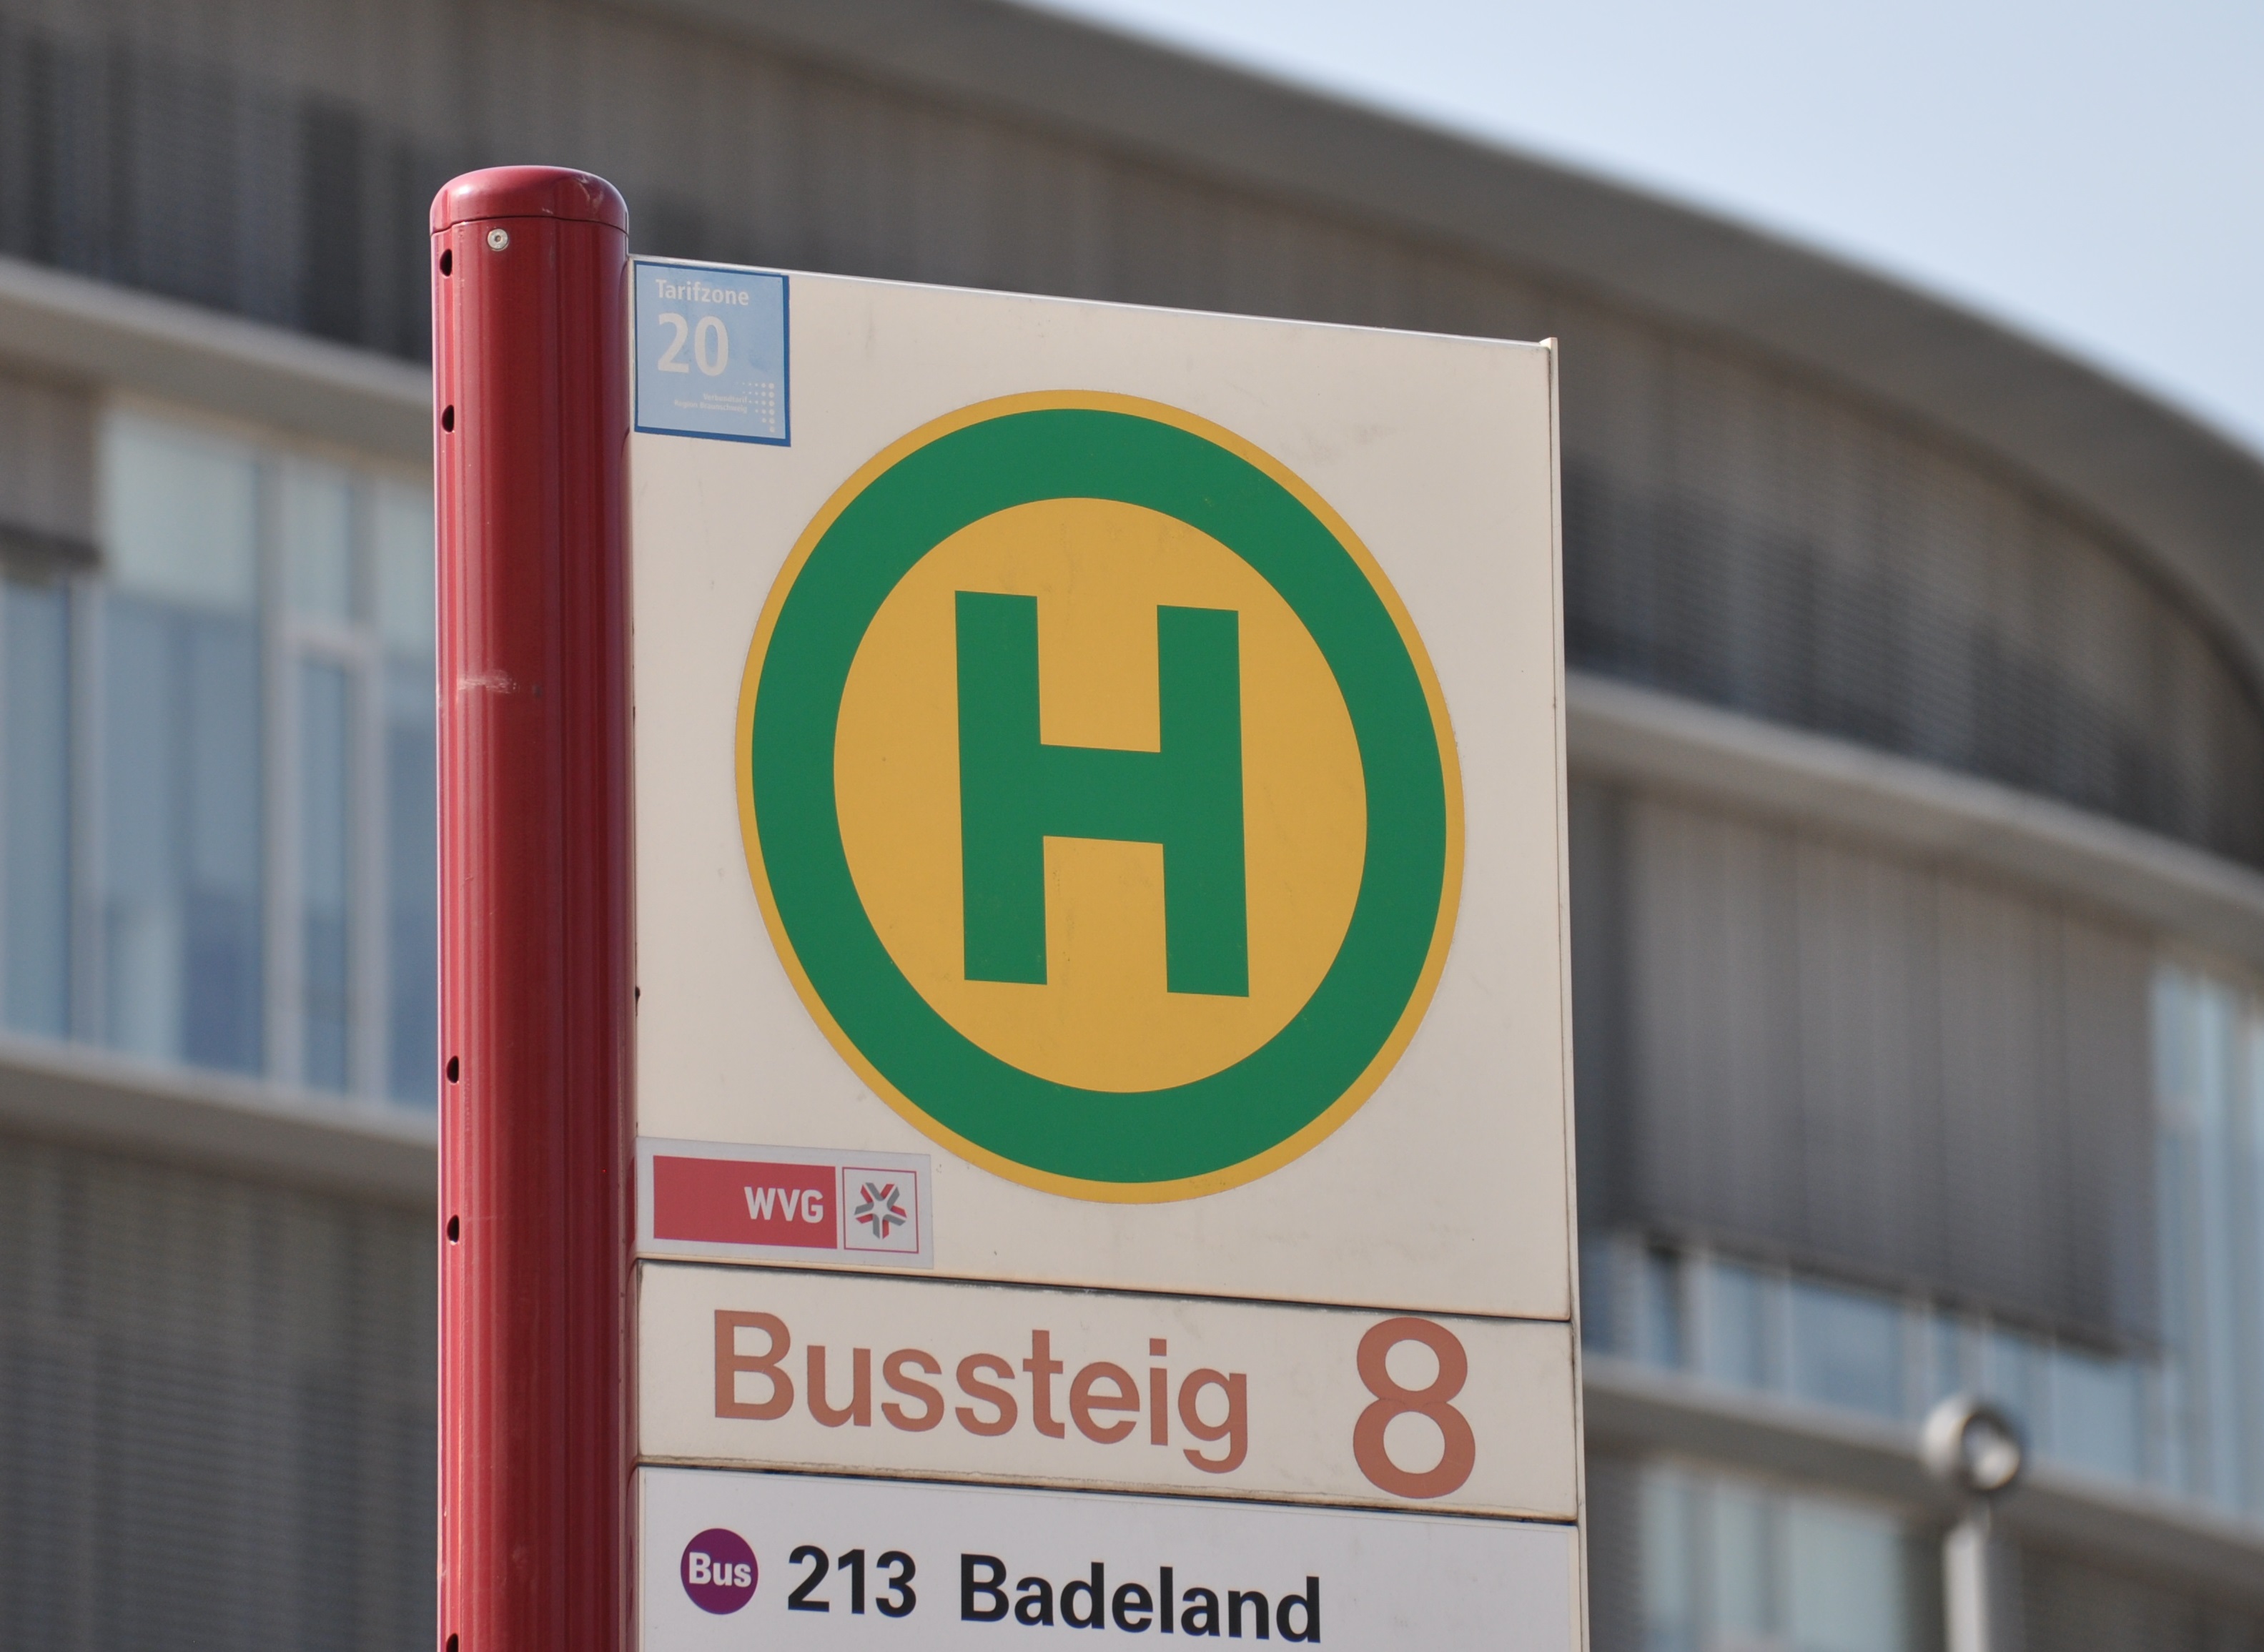 To the article Wolfsburg bus network